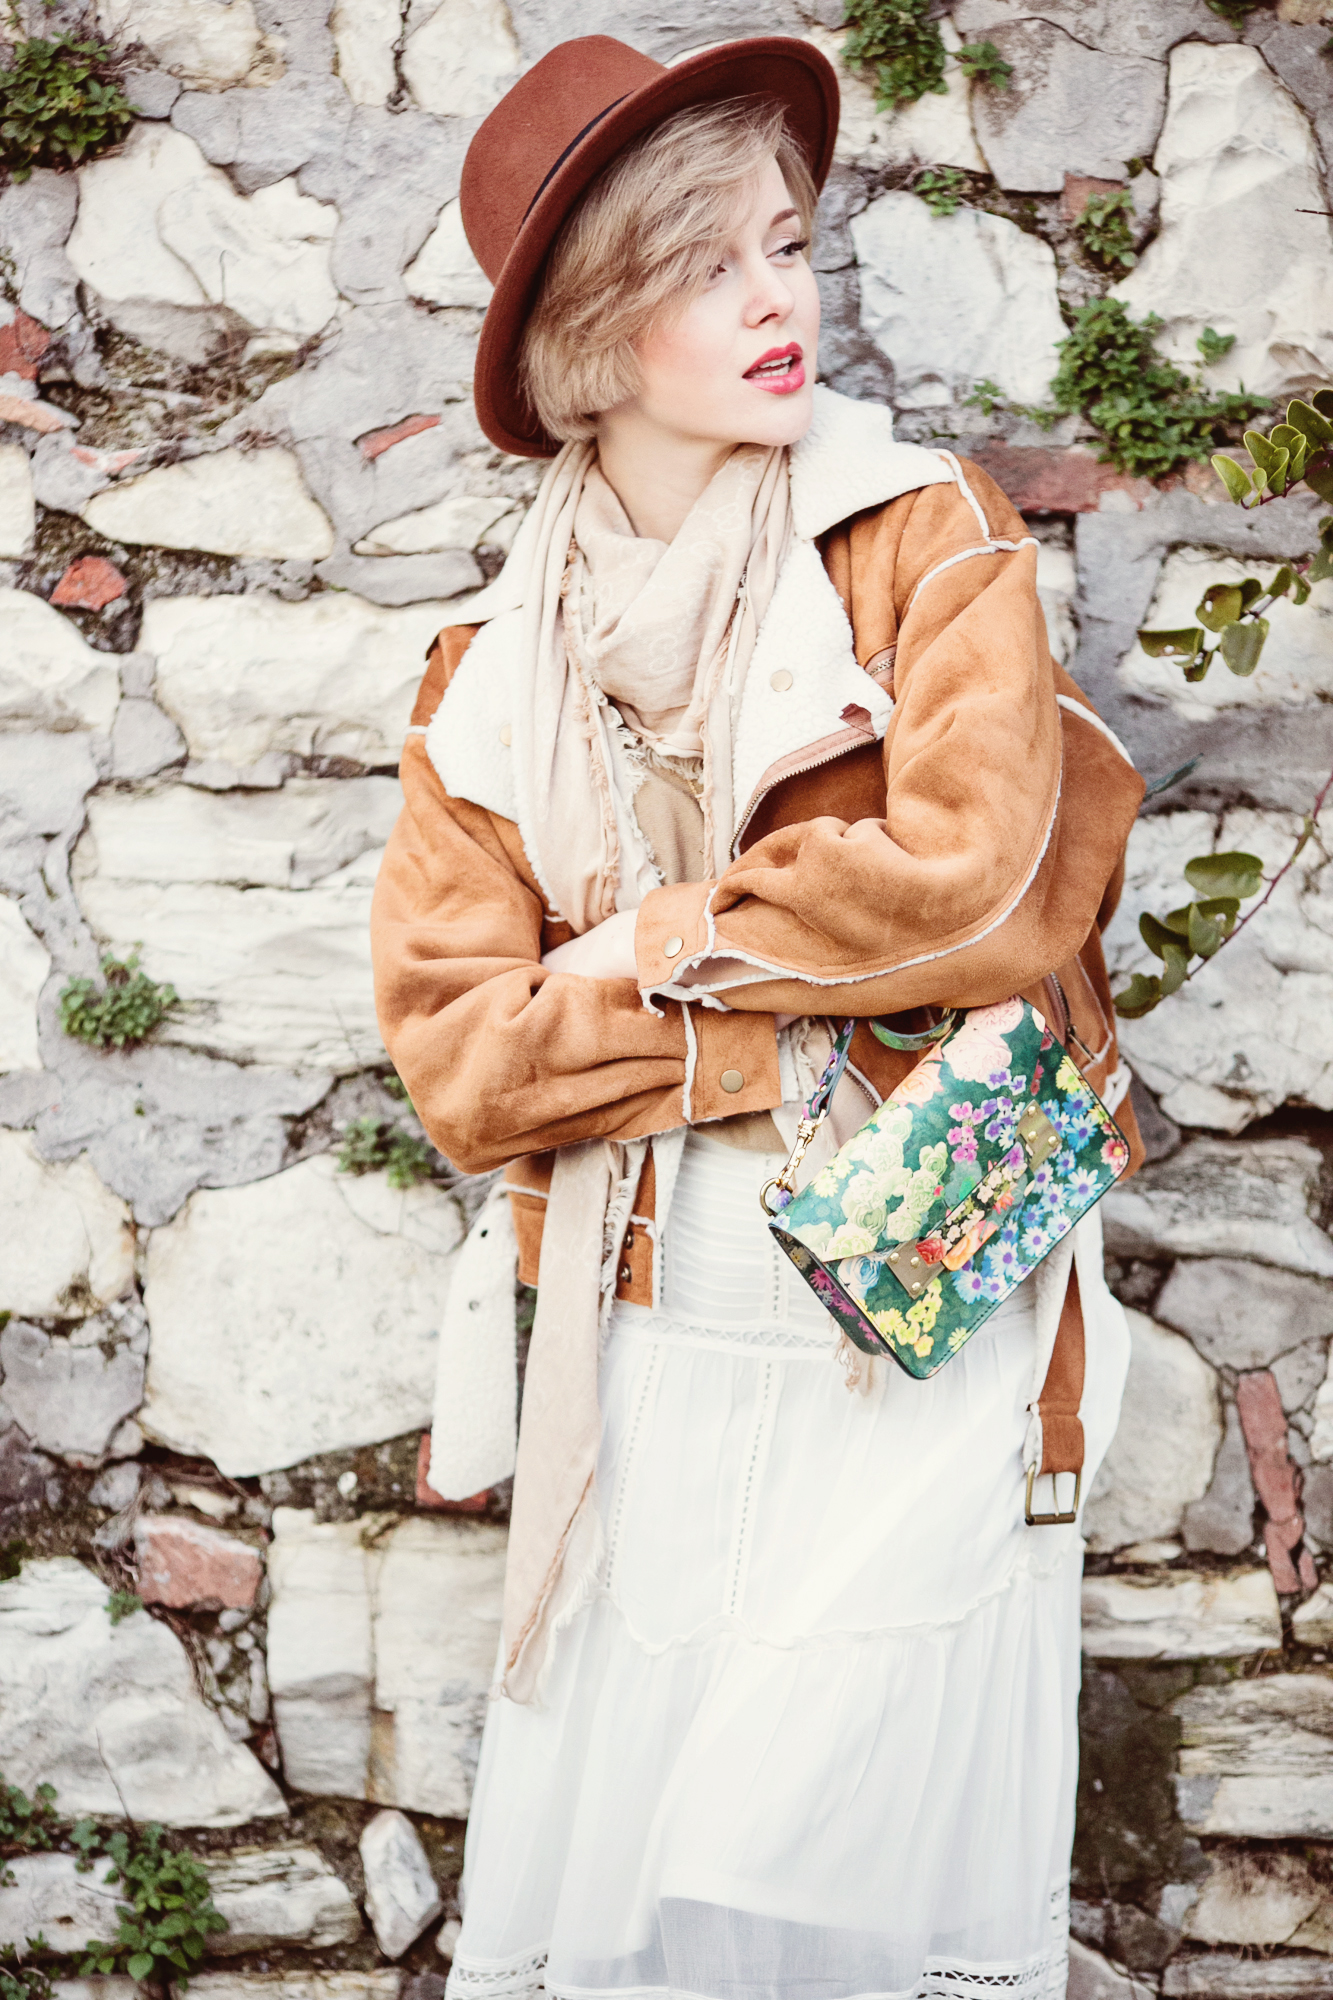 darya kamalova thecablook russian italian fashion bogger street style trend hm hat chicwish coat gucci scarf sophie hulme bag floral asos white skirt ash booties brescia centro storico italia italy-27 copy